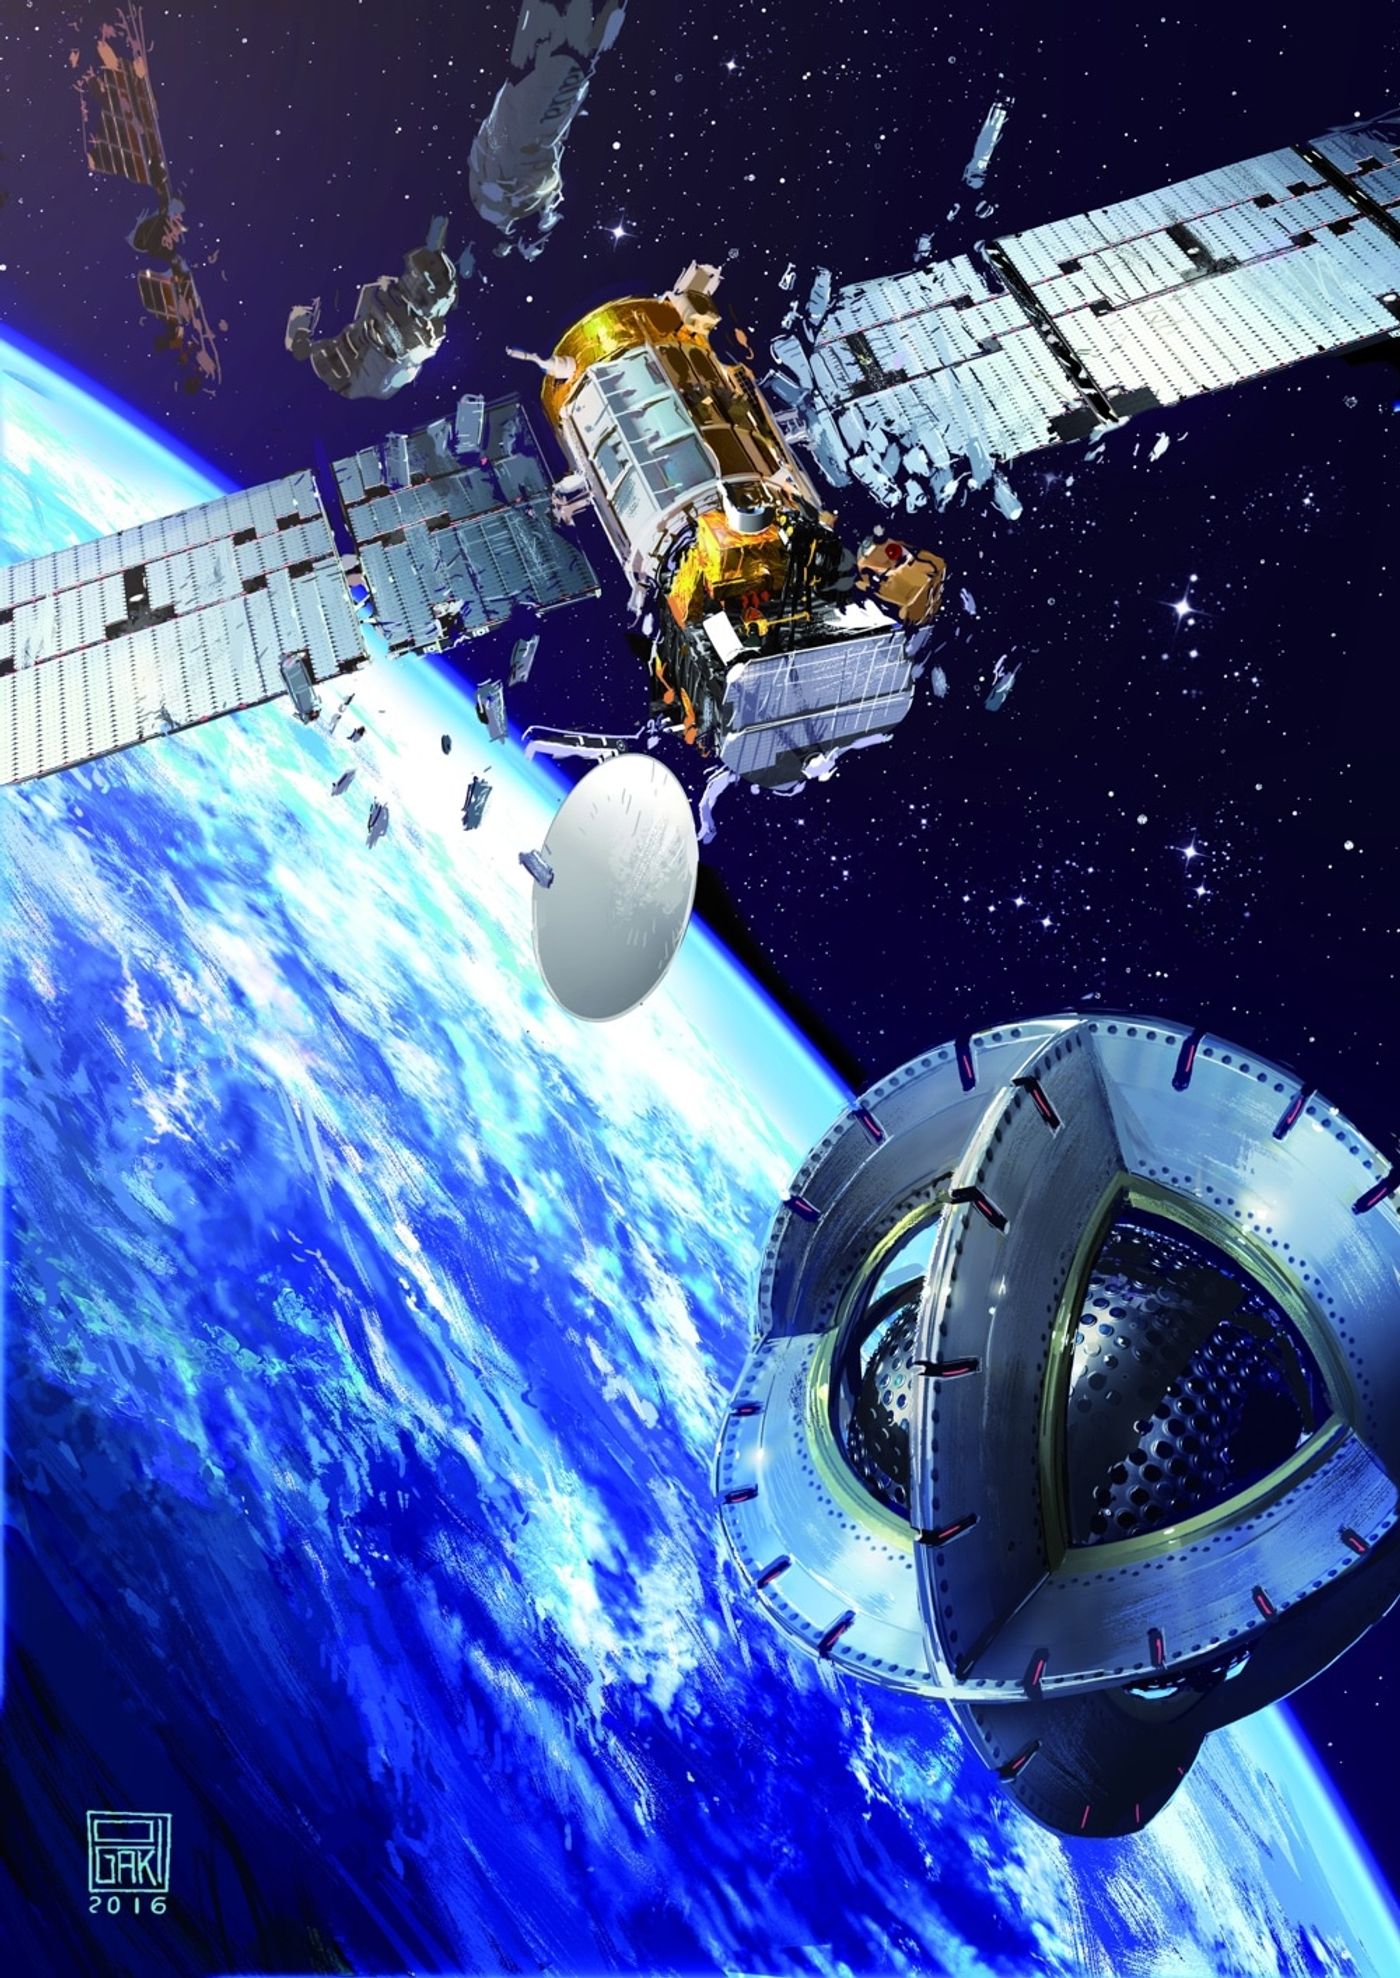 An artist's impression of a magnetic space tug as it approaches an inactive satellite orbiting Earth.